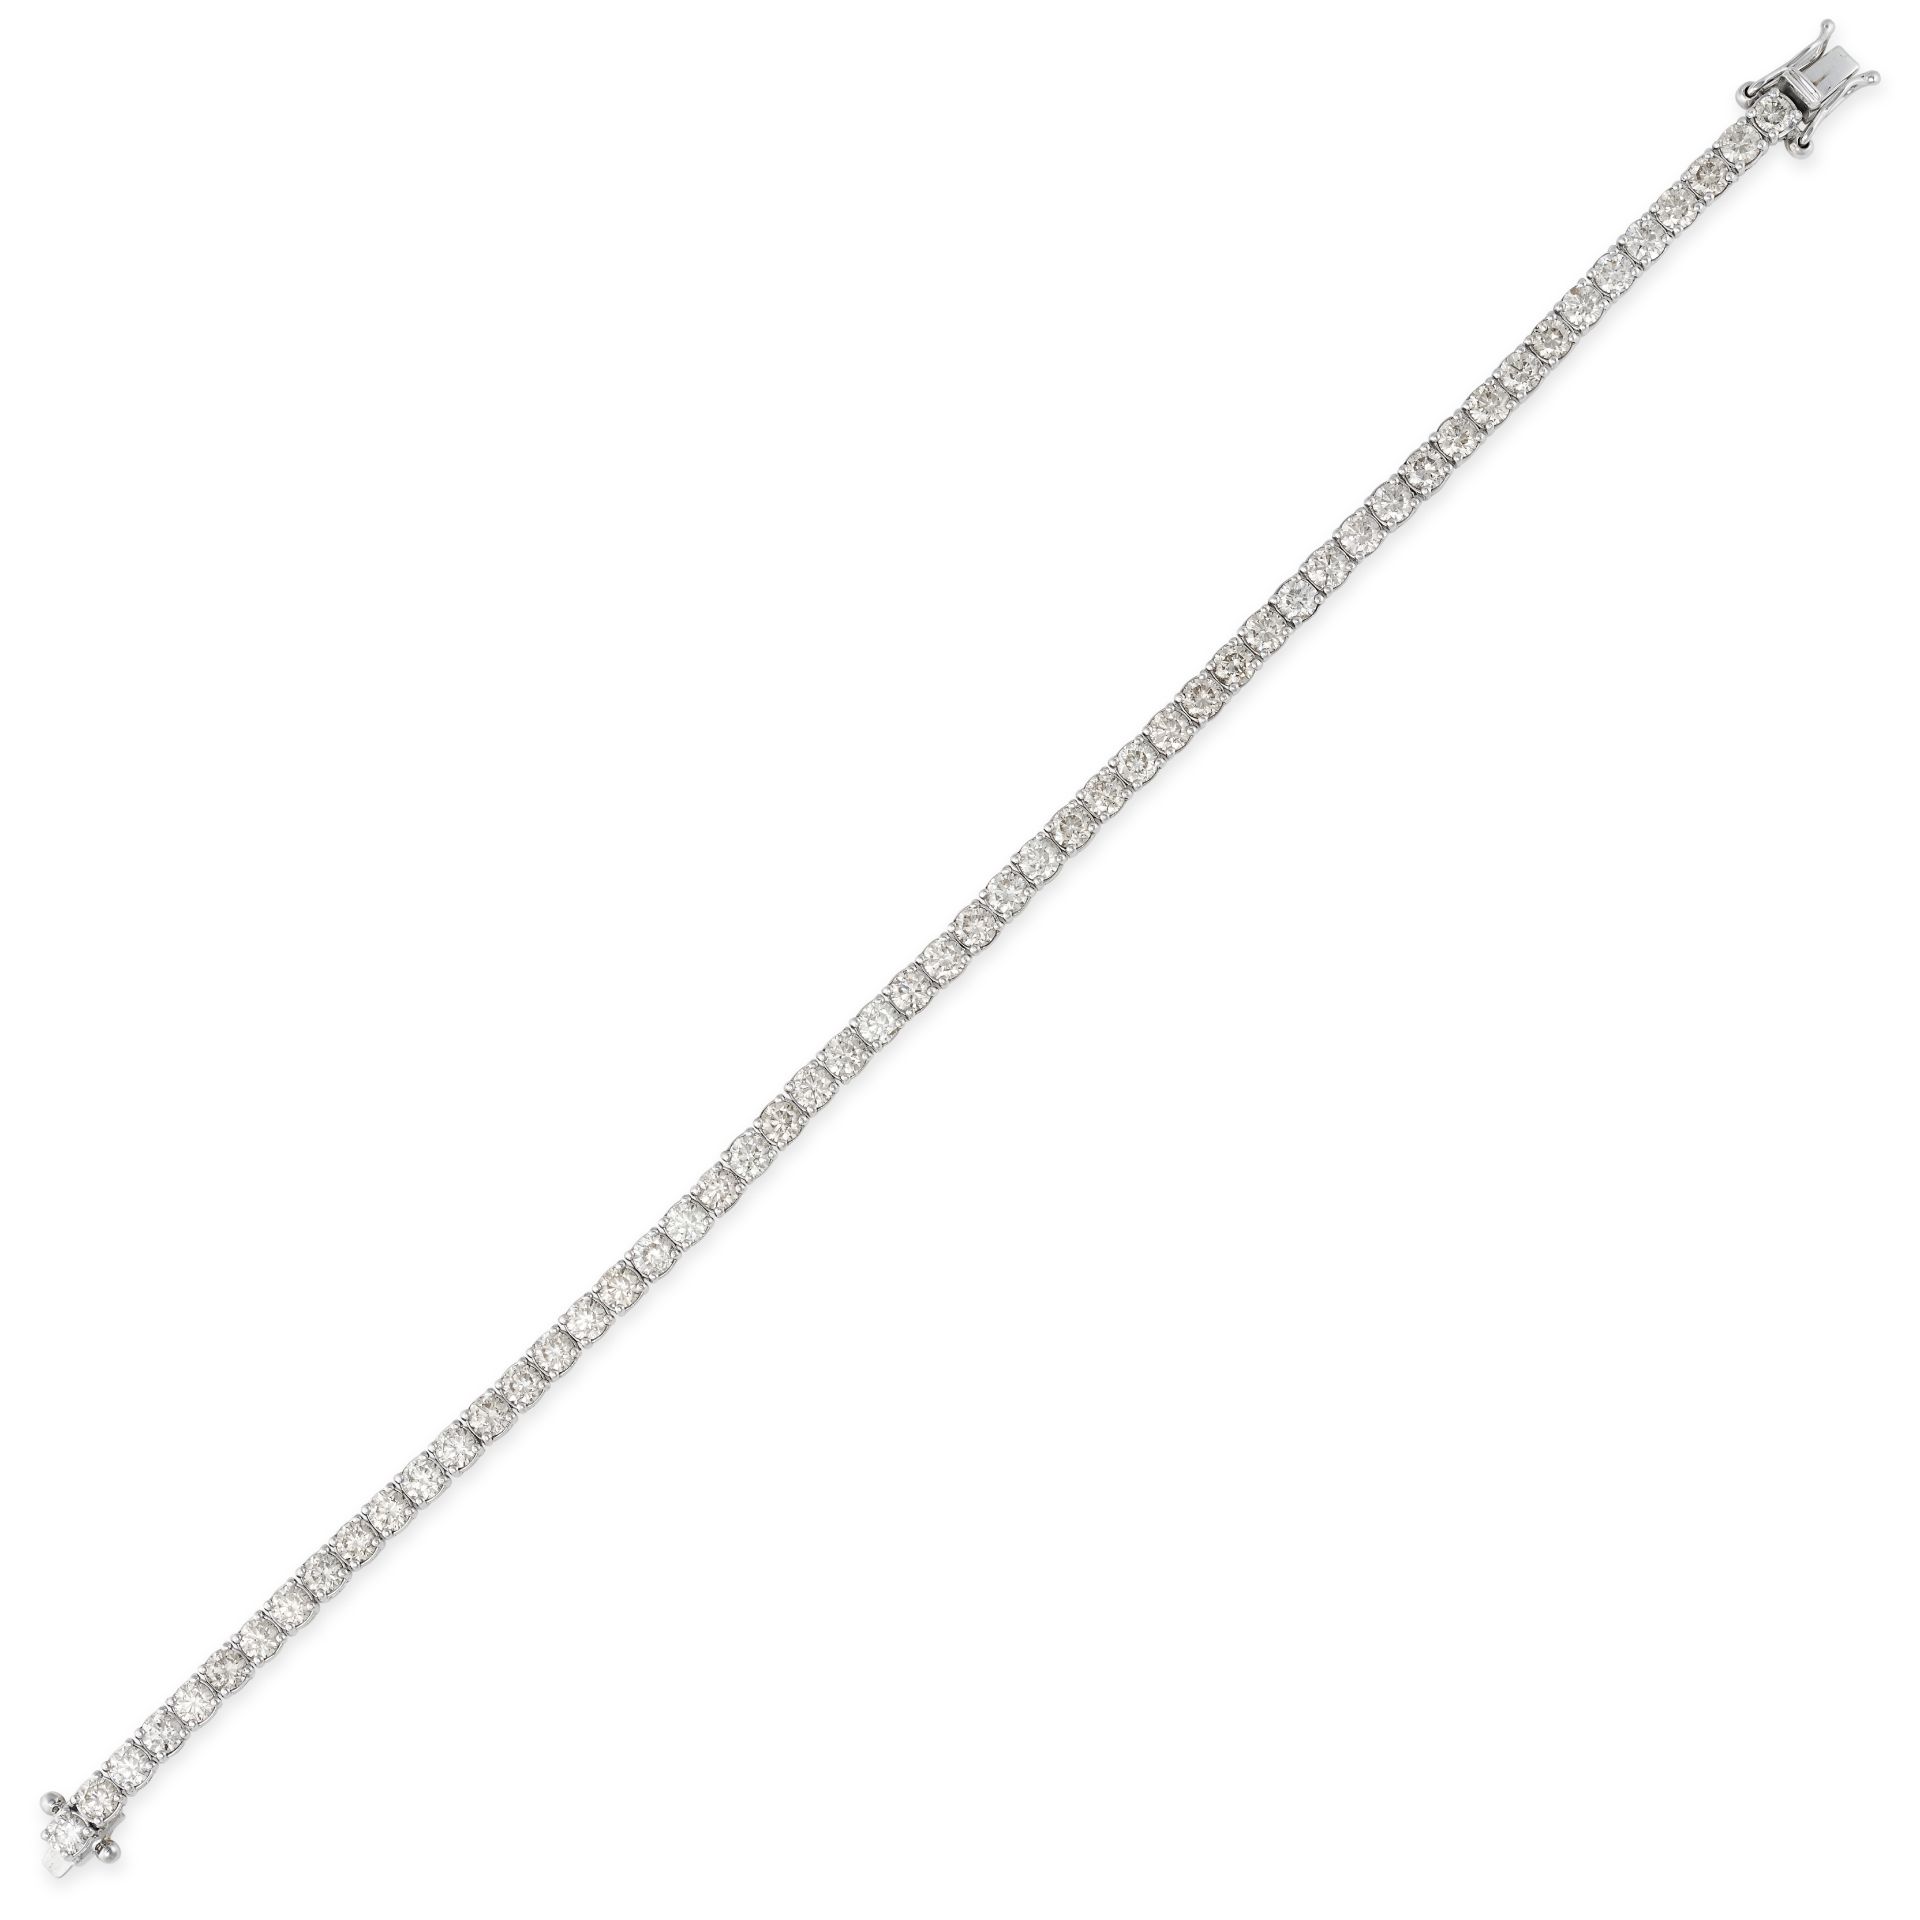 A 7.00 CARAT DIAMOND LINE BRACELET in 18ct white gold, set with a single row of round brilliant c...